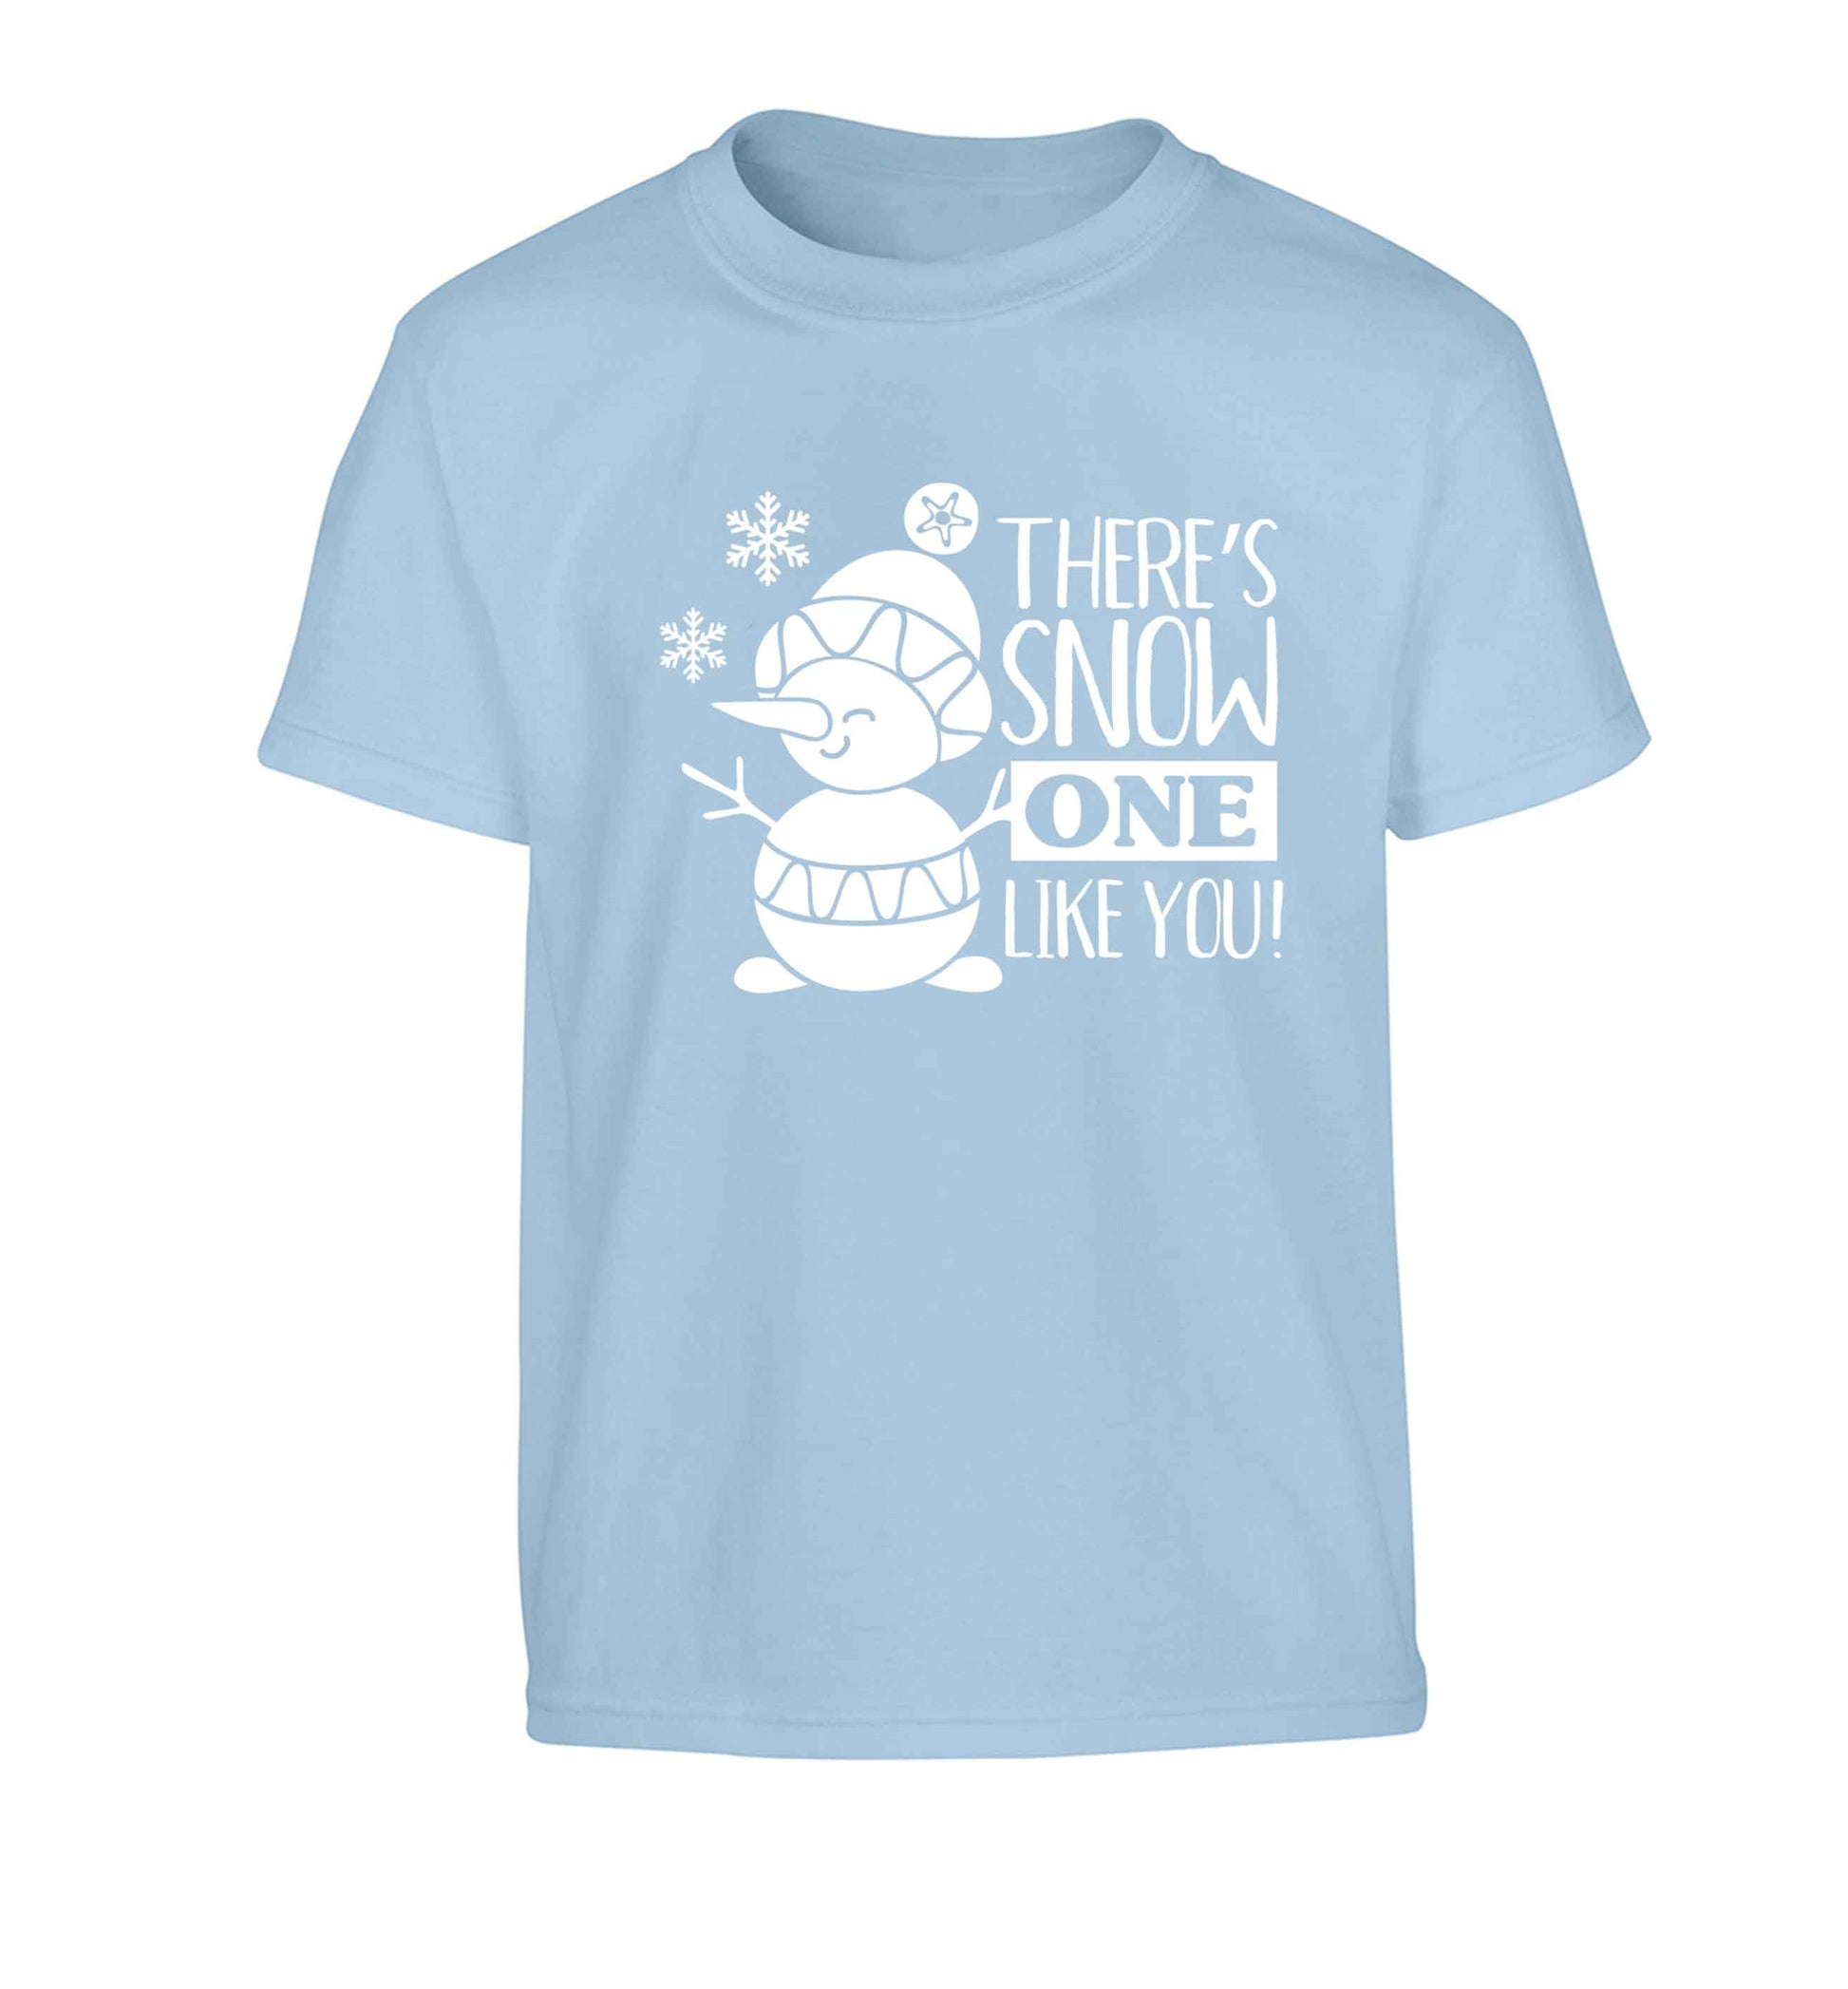 There's snow one like you Children's light blue Tshirt 12-13 Years